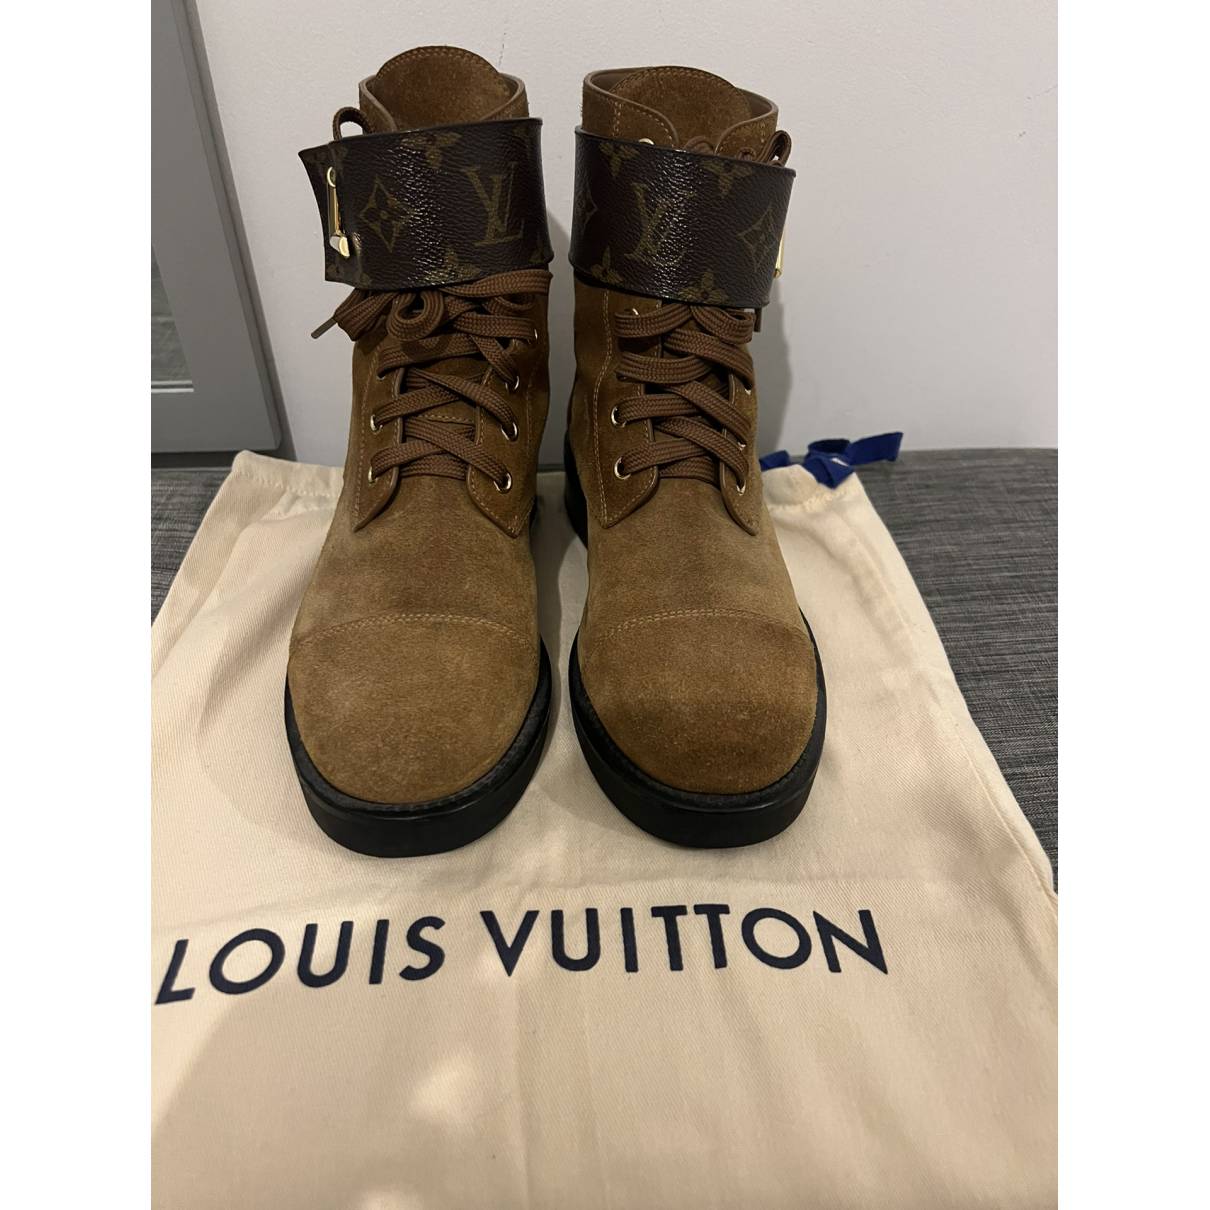 Louis Vuitton  Boots, Leather boots, Fashion boots